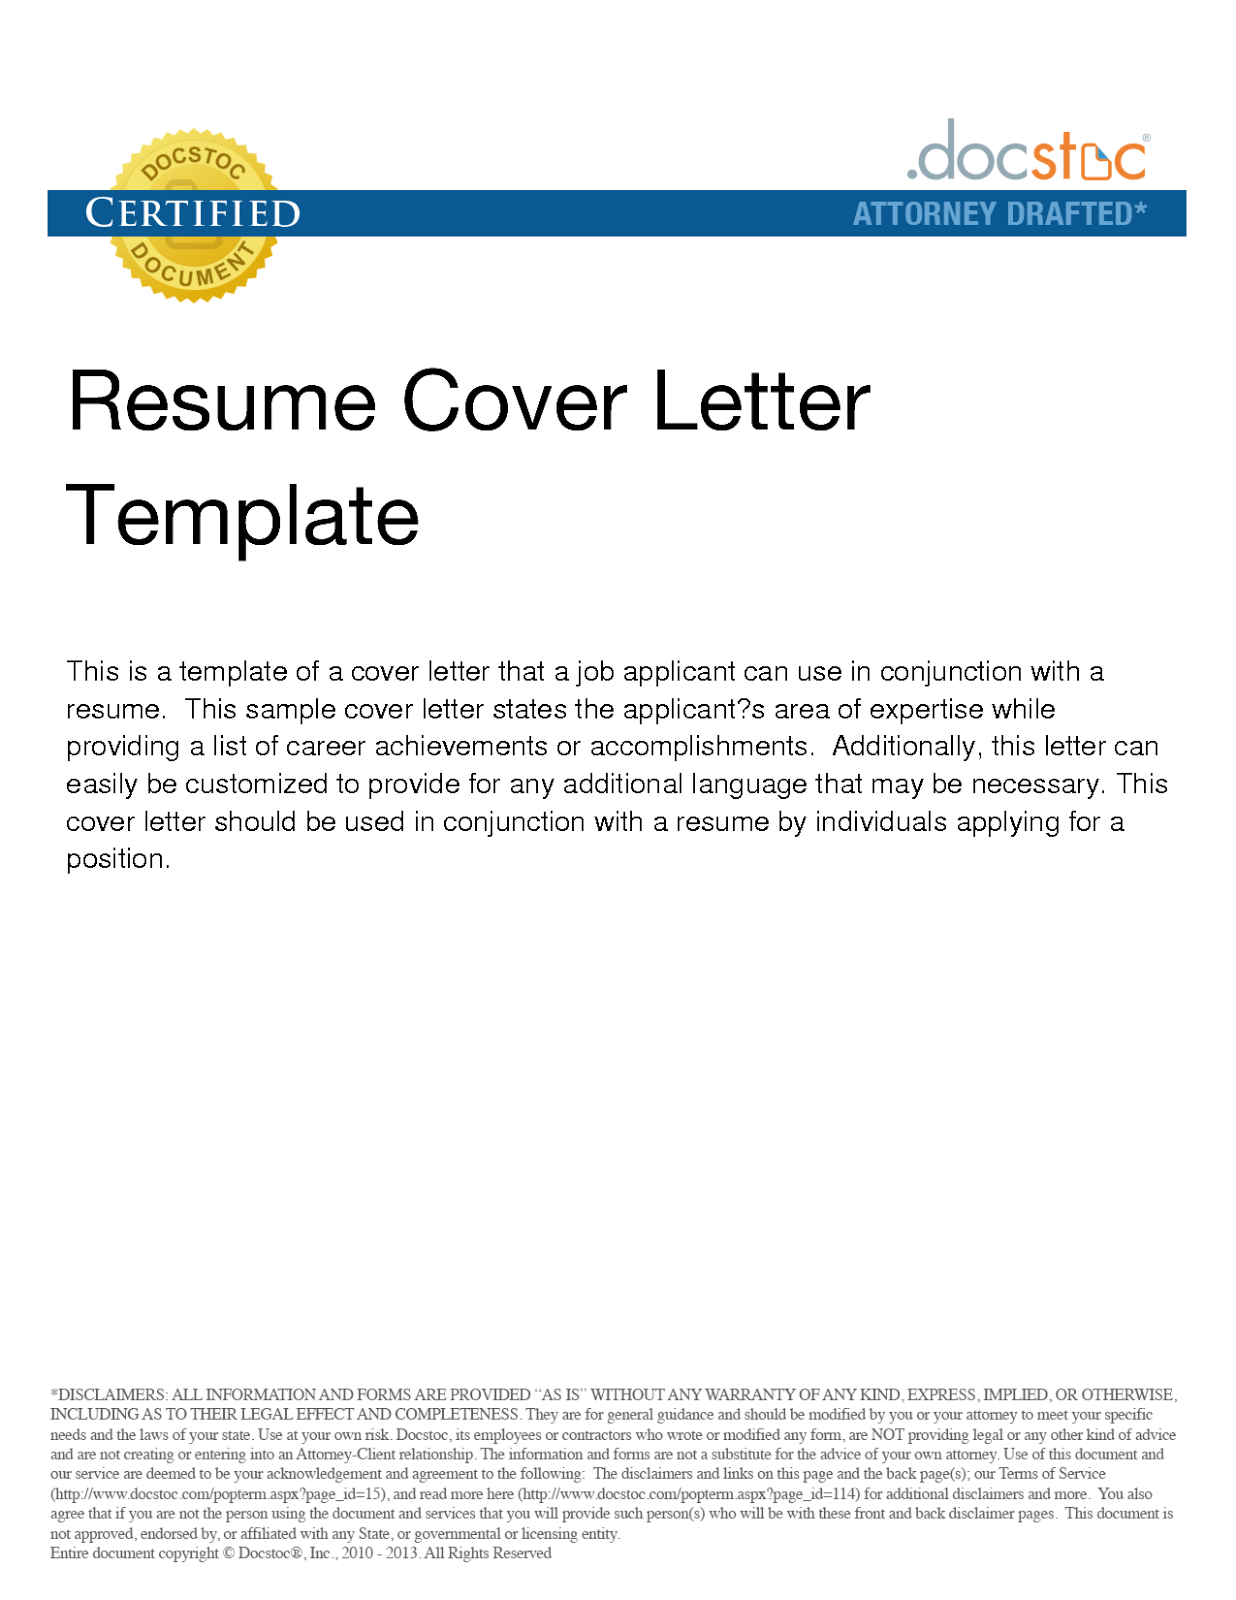 Samples of email cover letter for resumes